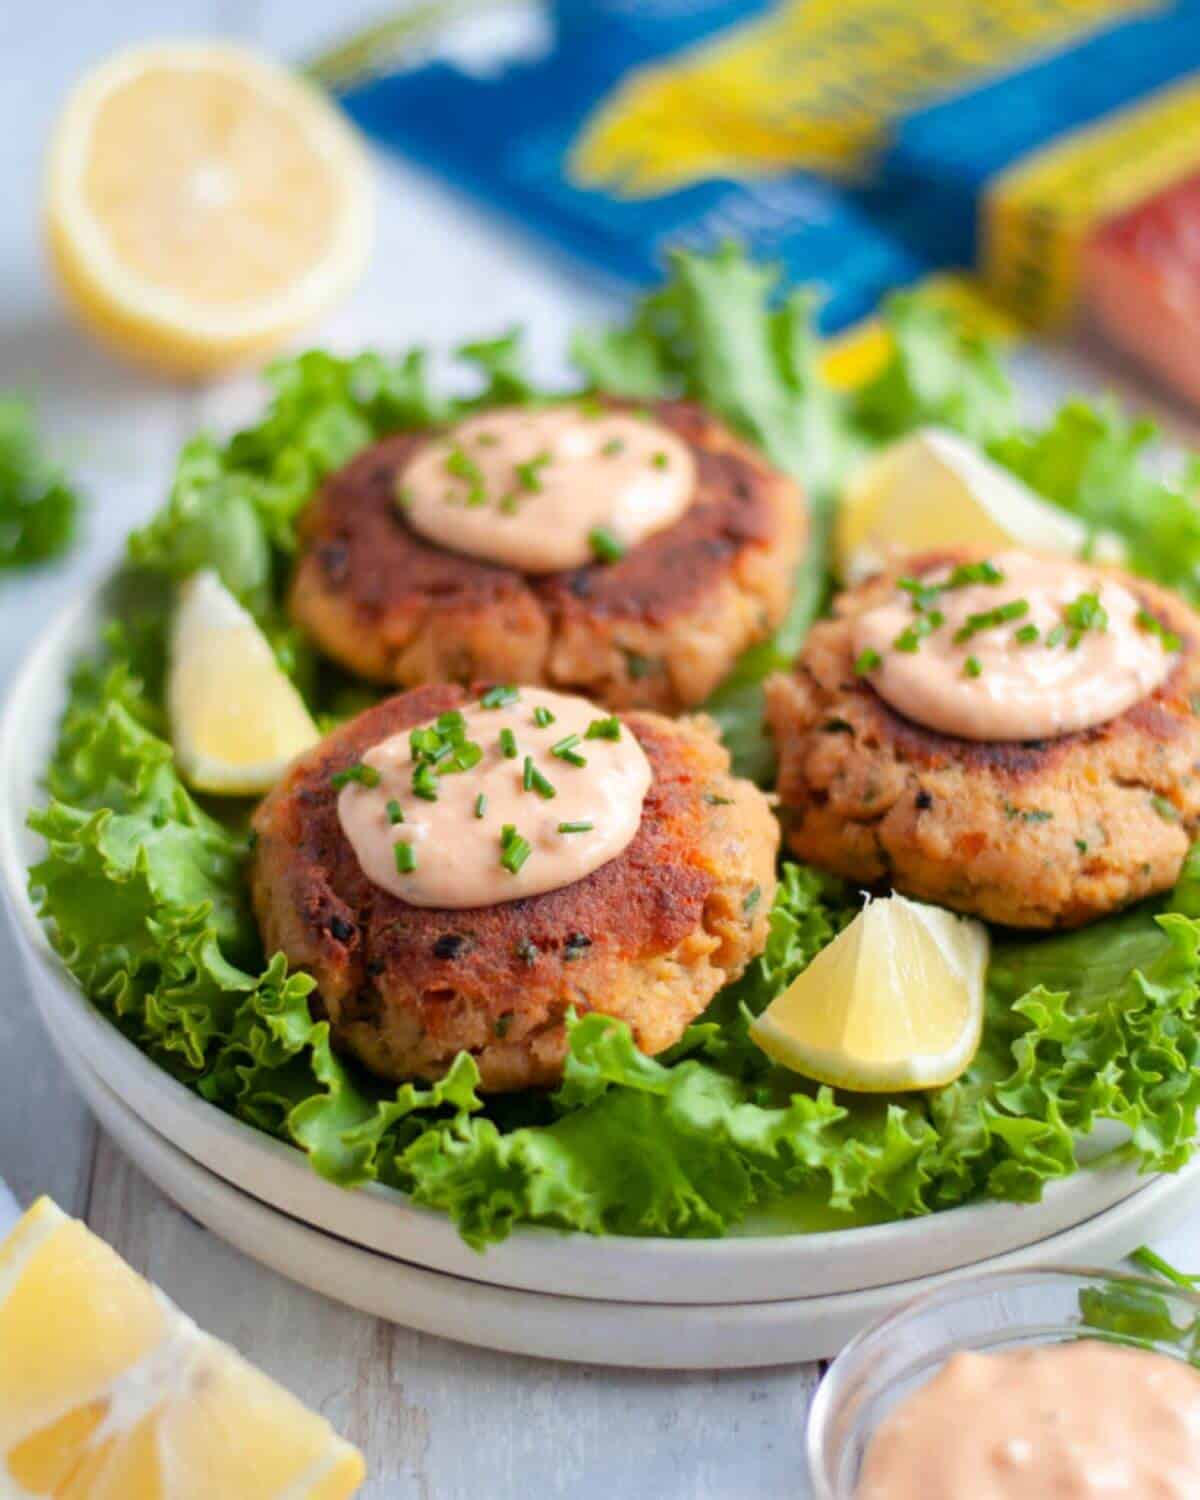 Three salmon cakes on top of rocket salad and garnished with cream sauce and herbs. 